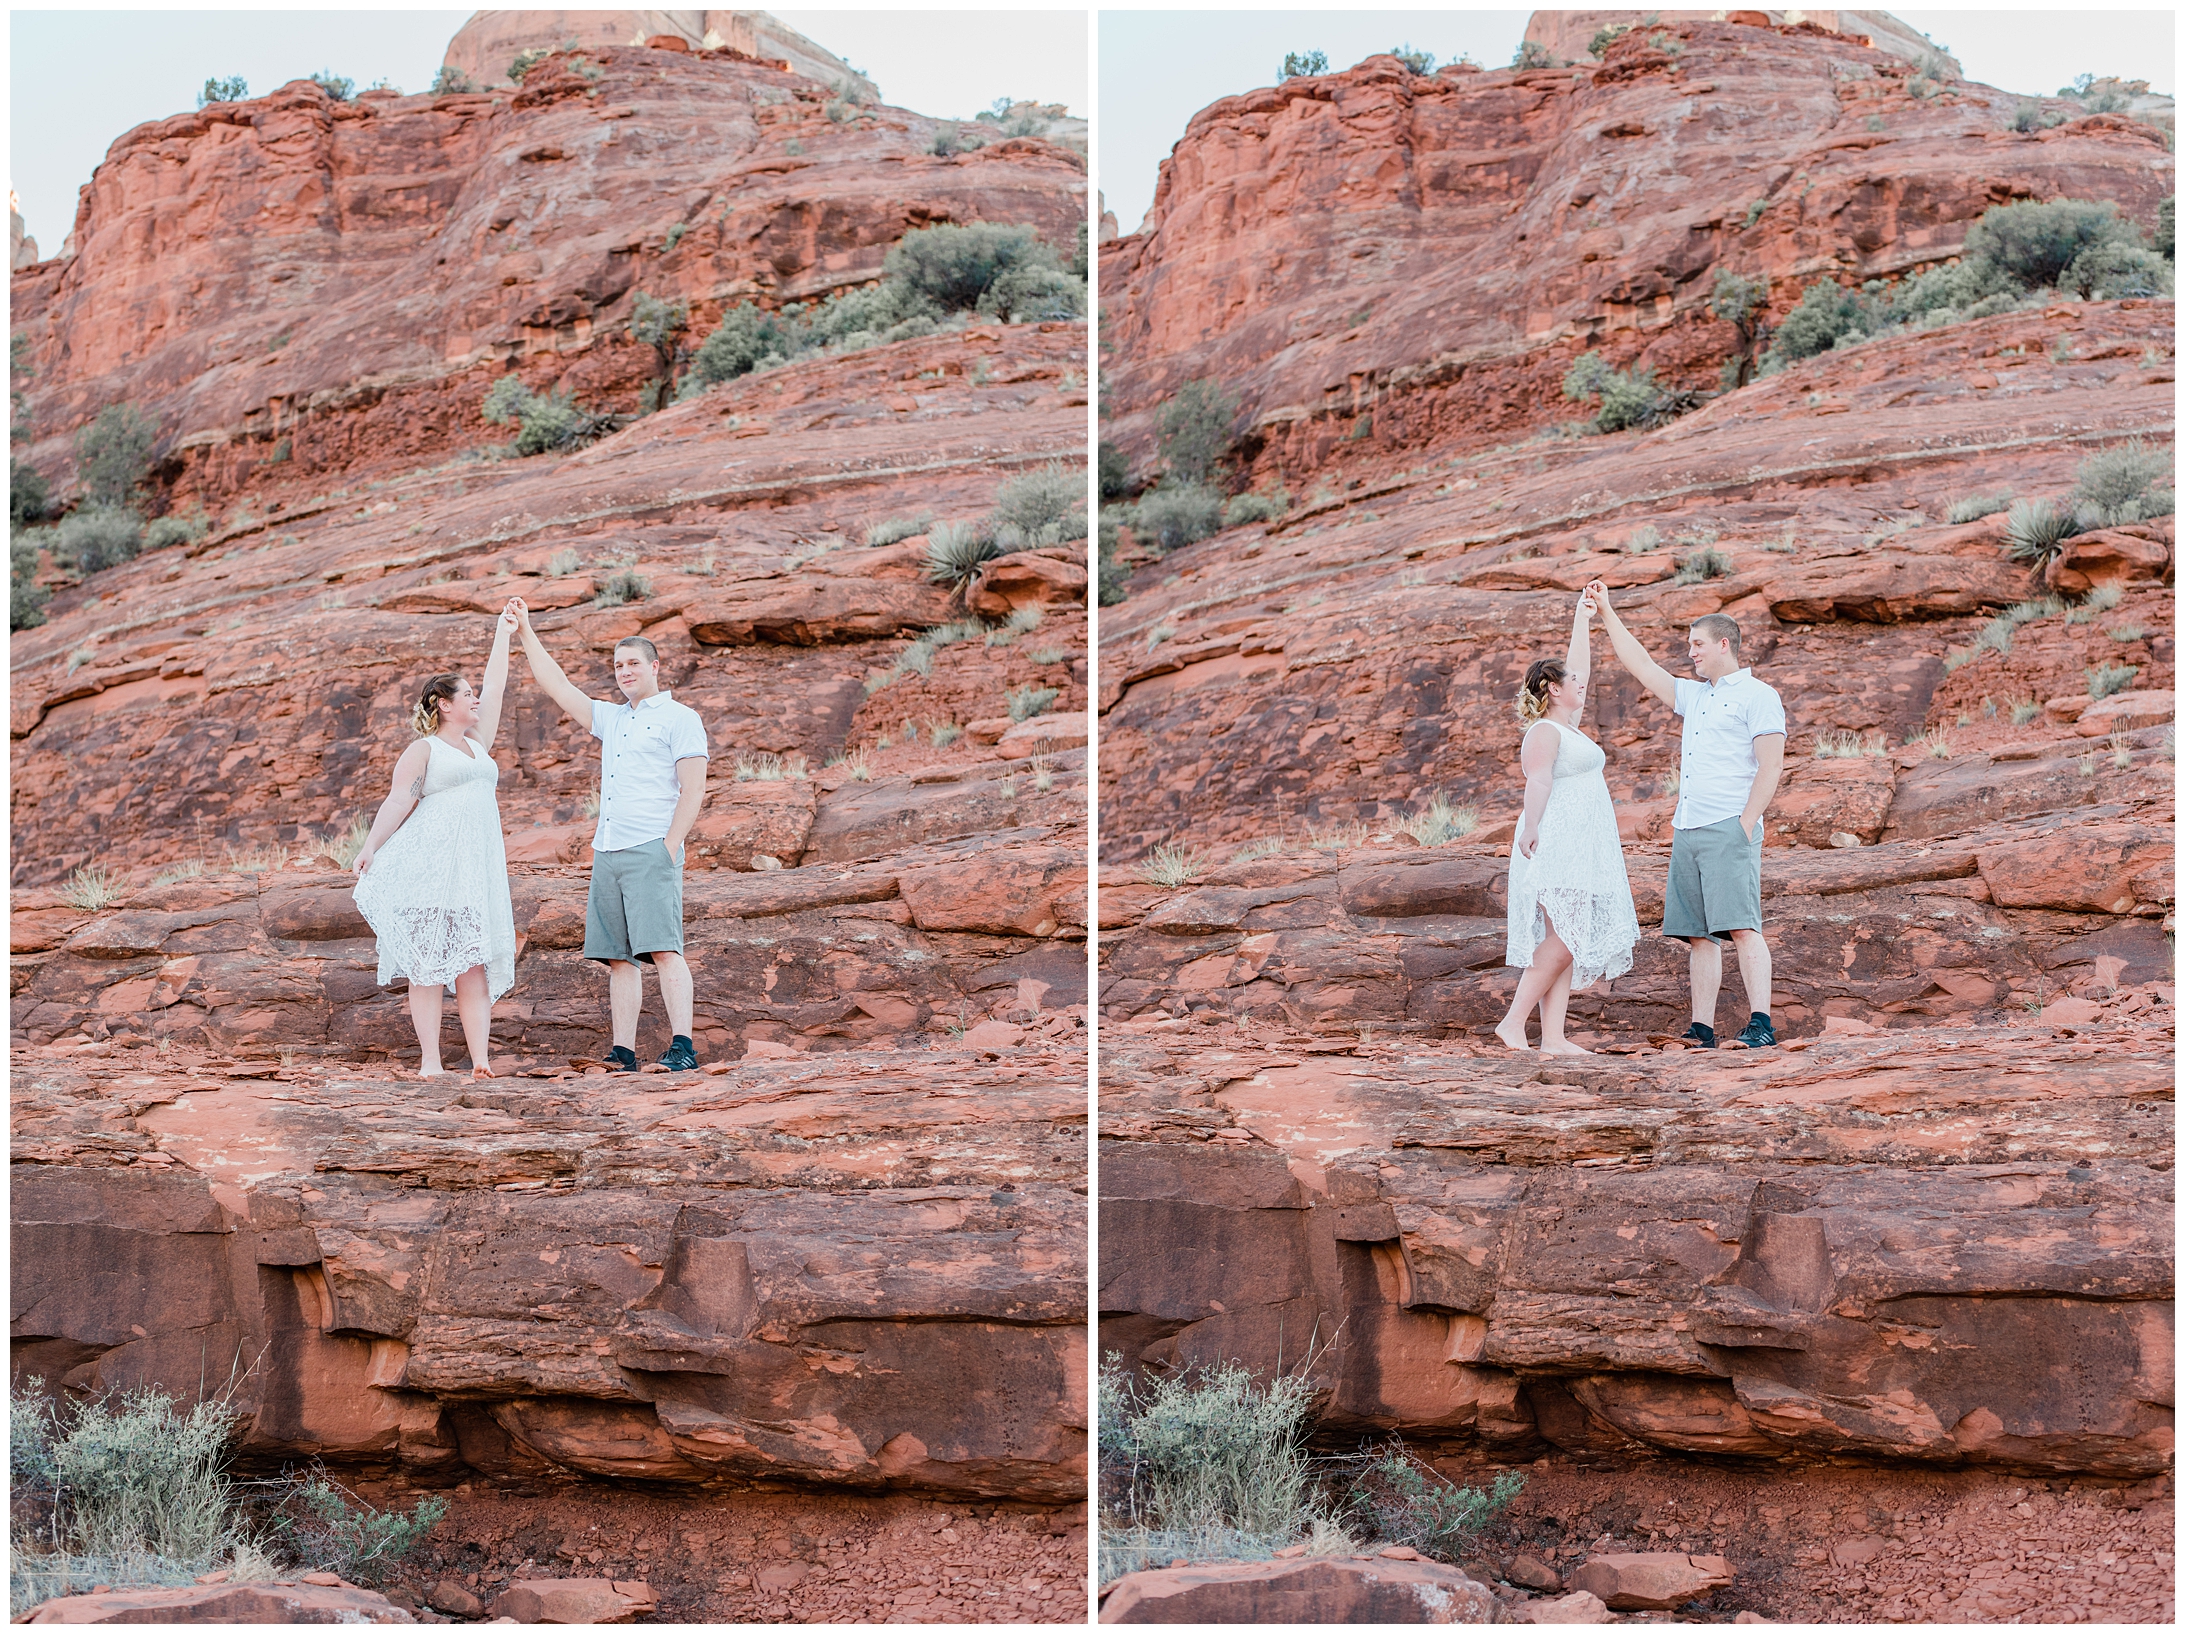 man and woman wearing white and dancing in front of mountain